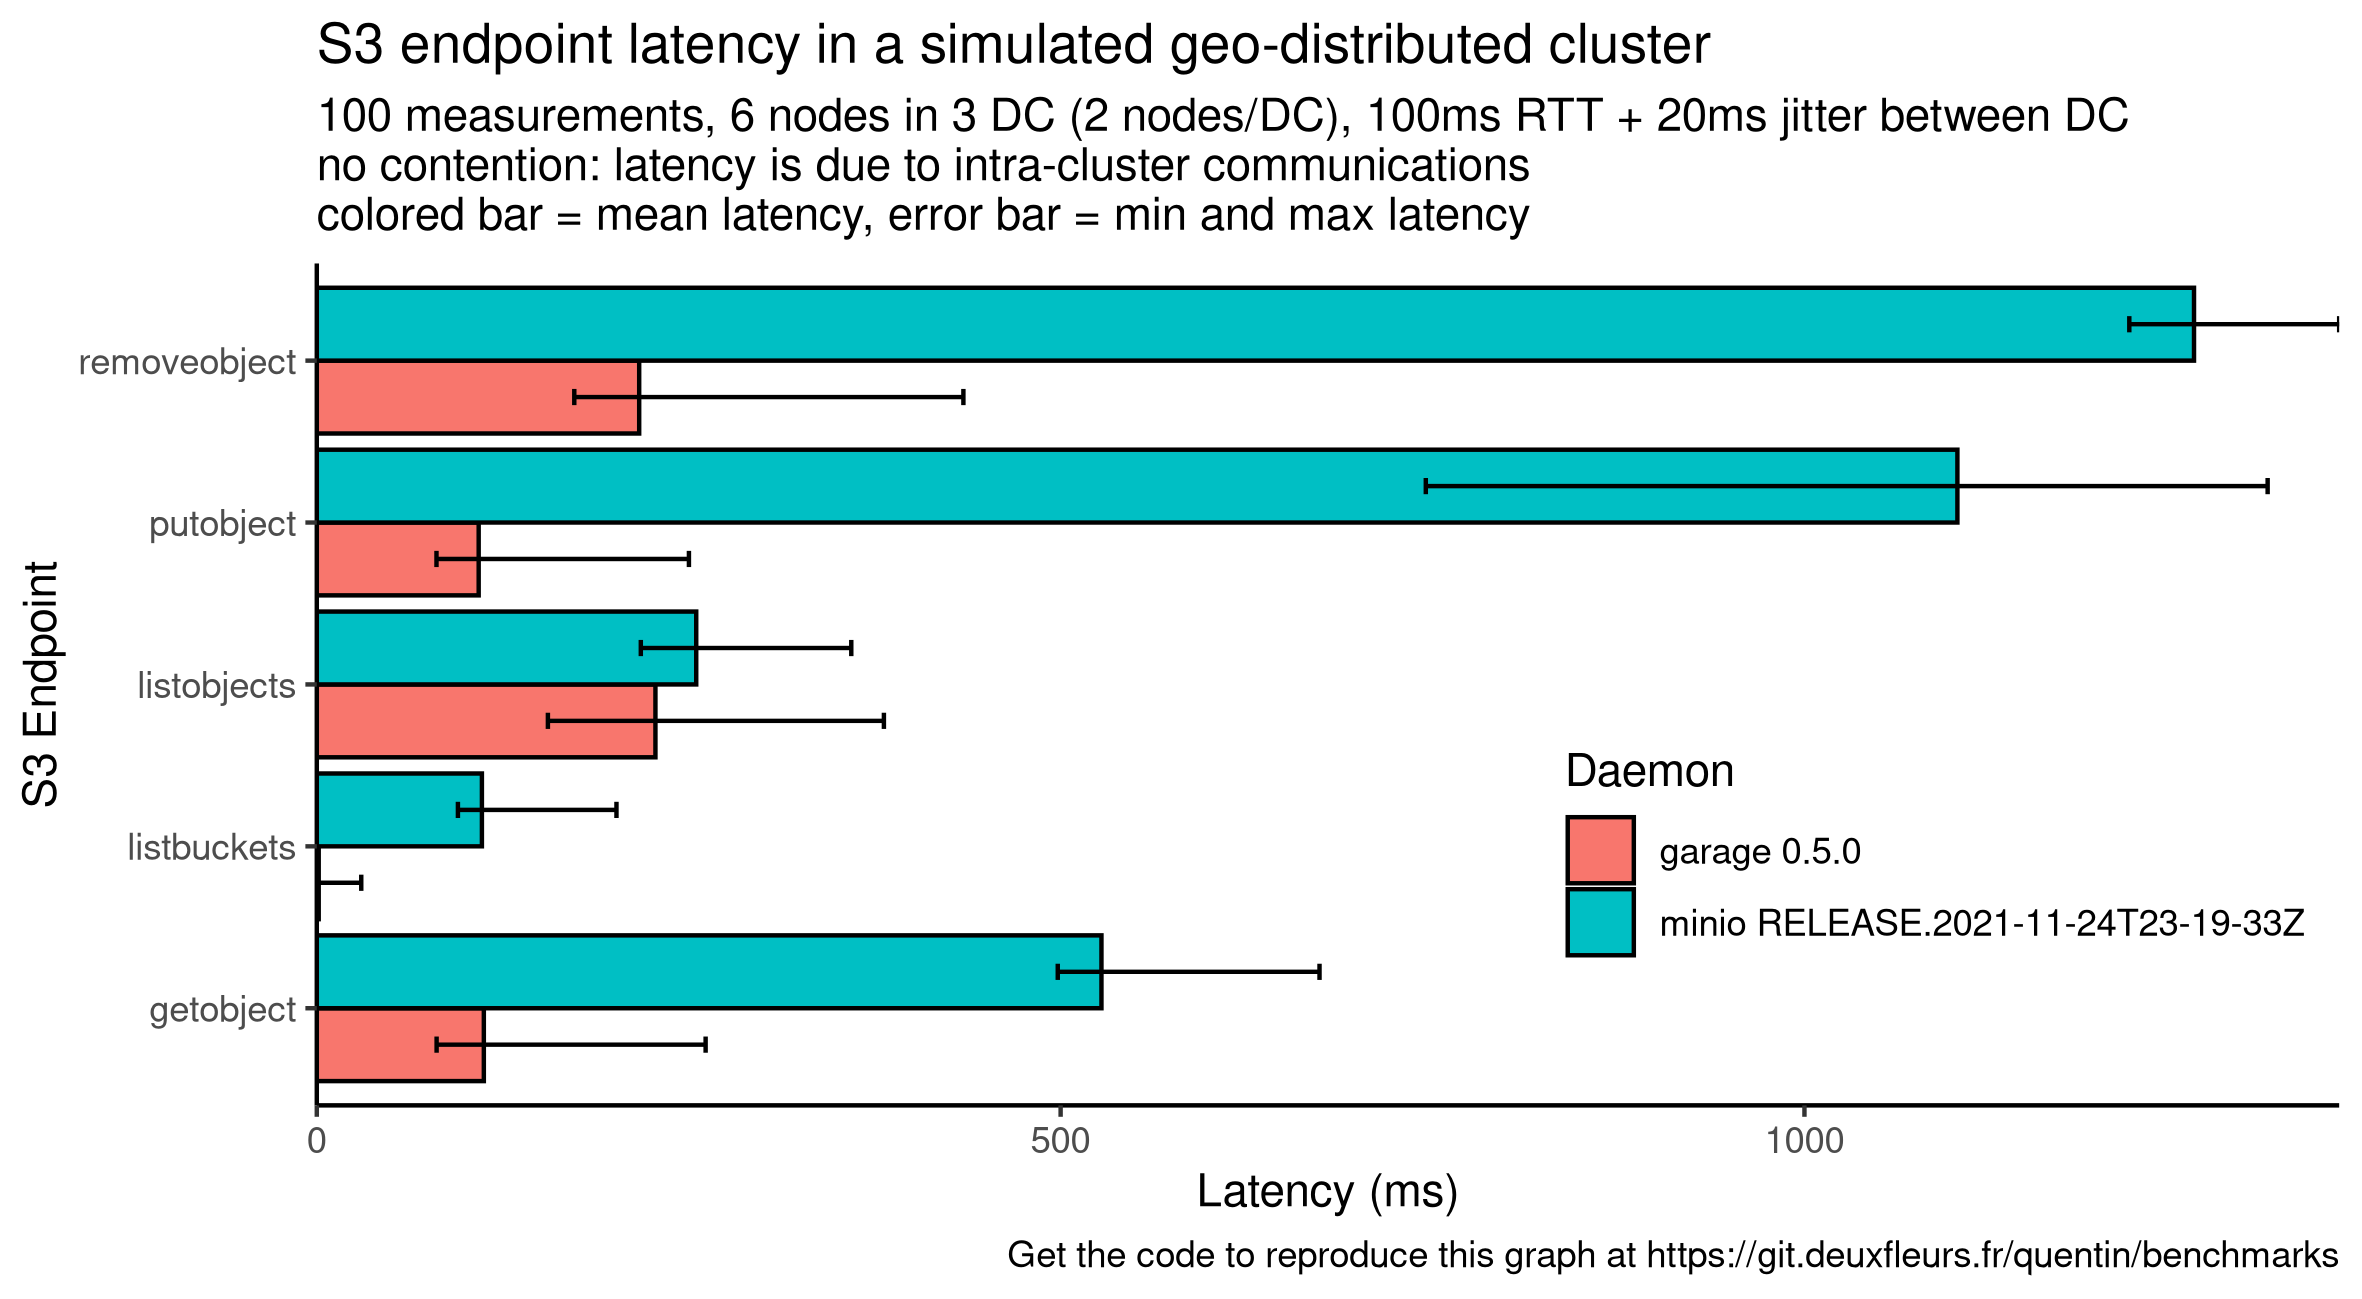 Comparison of endpoints latency for minio and garage with 6  nodes in 3 DC